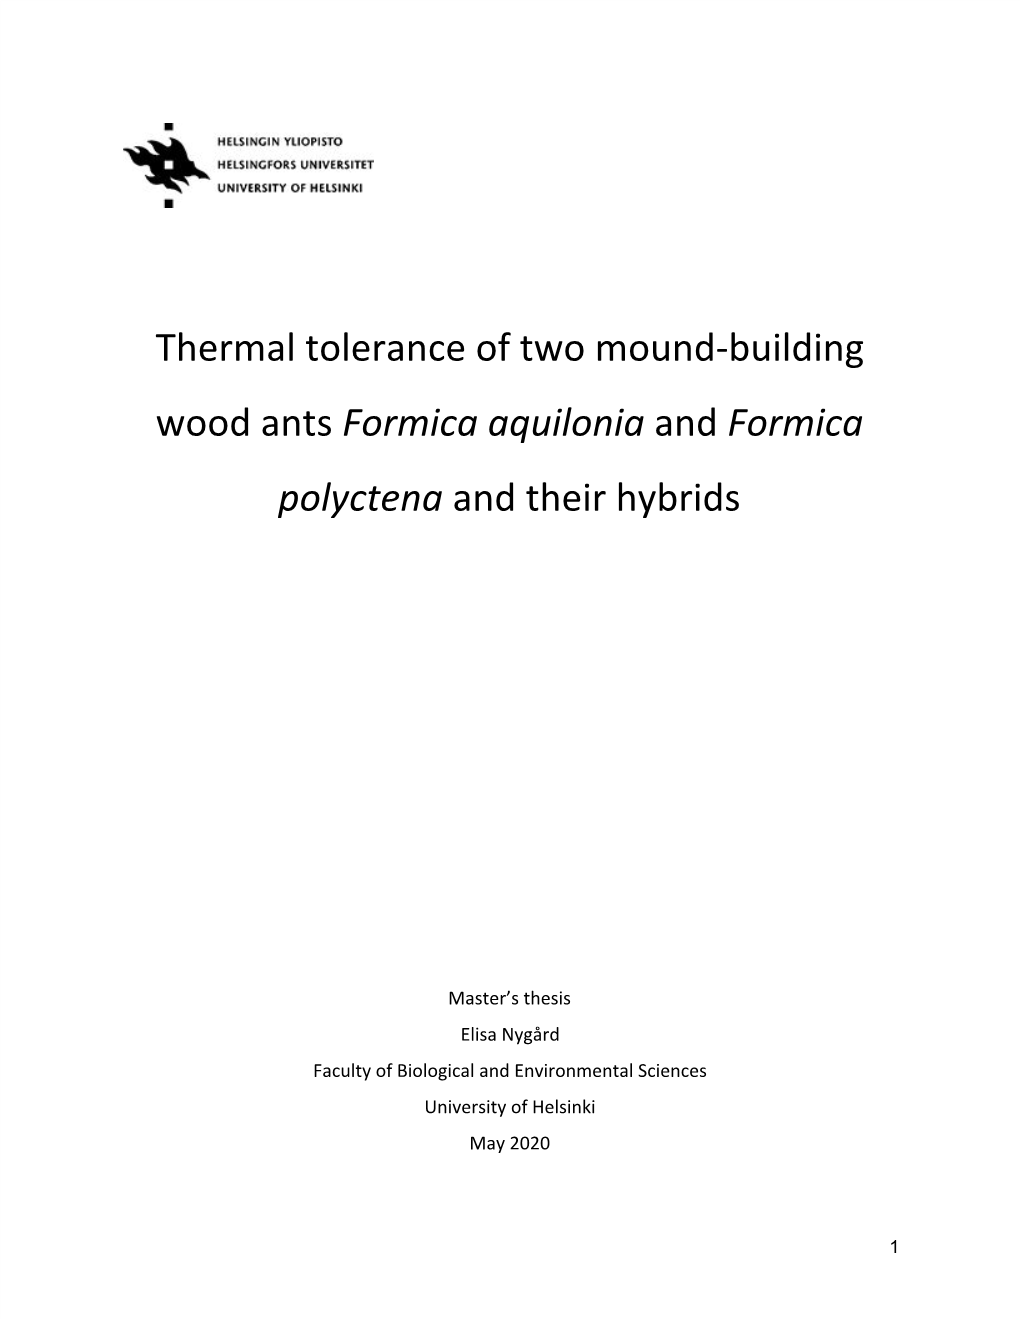 Thermal Tolerance of Two Mound-Building Wood Ants Formica Aquilonia and Formica ​ ​ ​ Polyctena and Their Hybrids ​